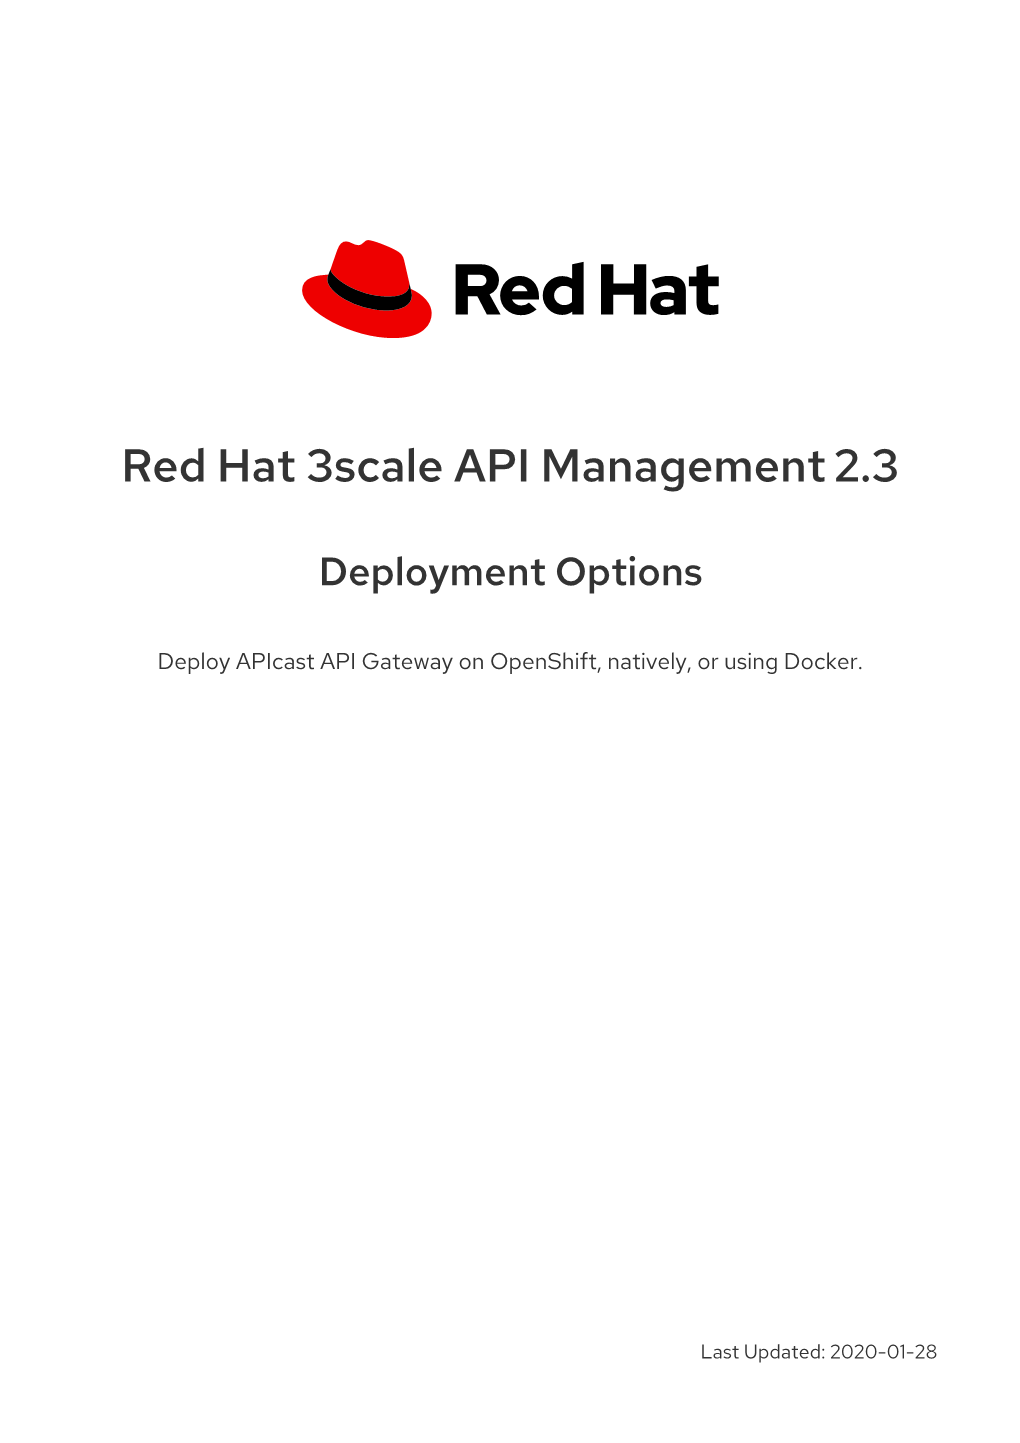 Red Hat 3Scale API Management 2.3 Deployment Options